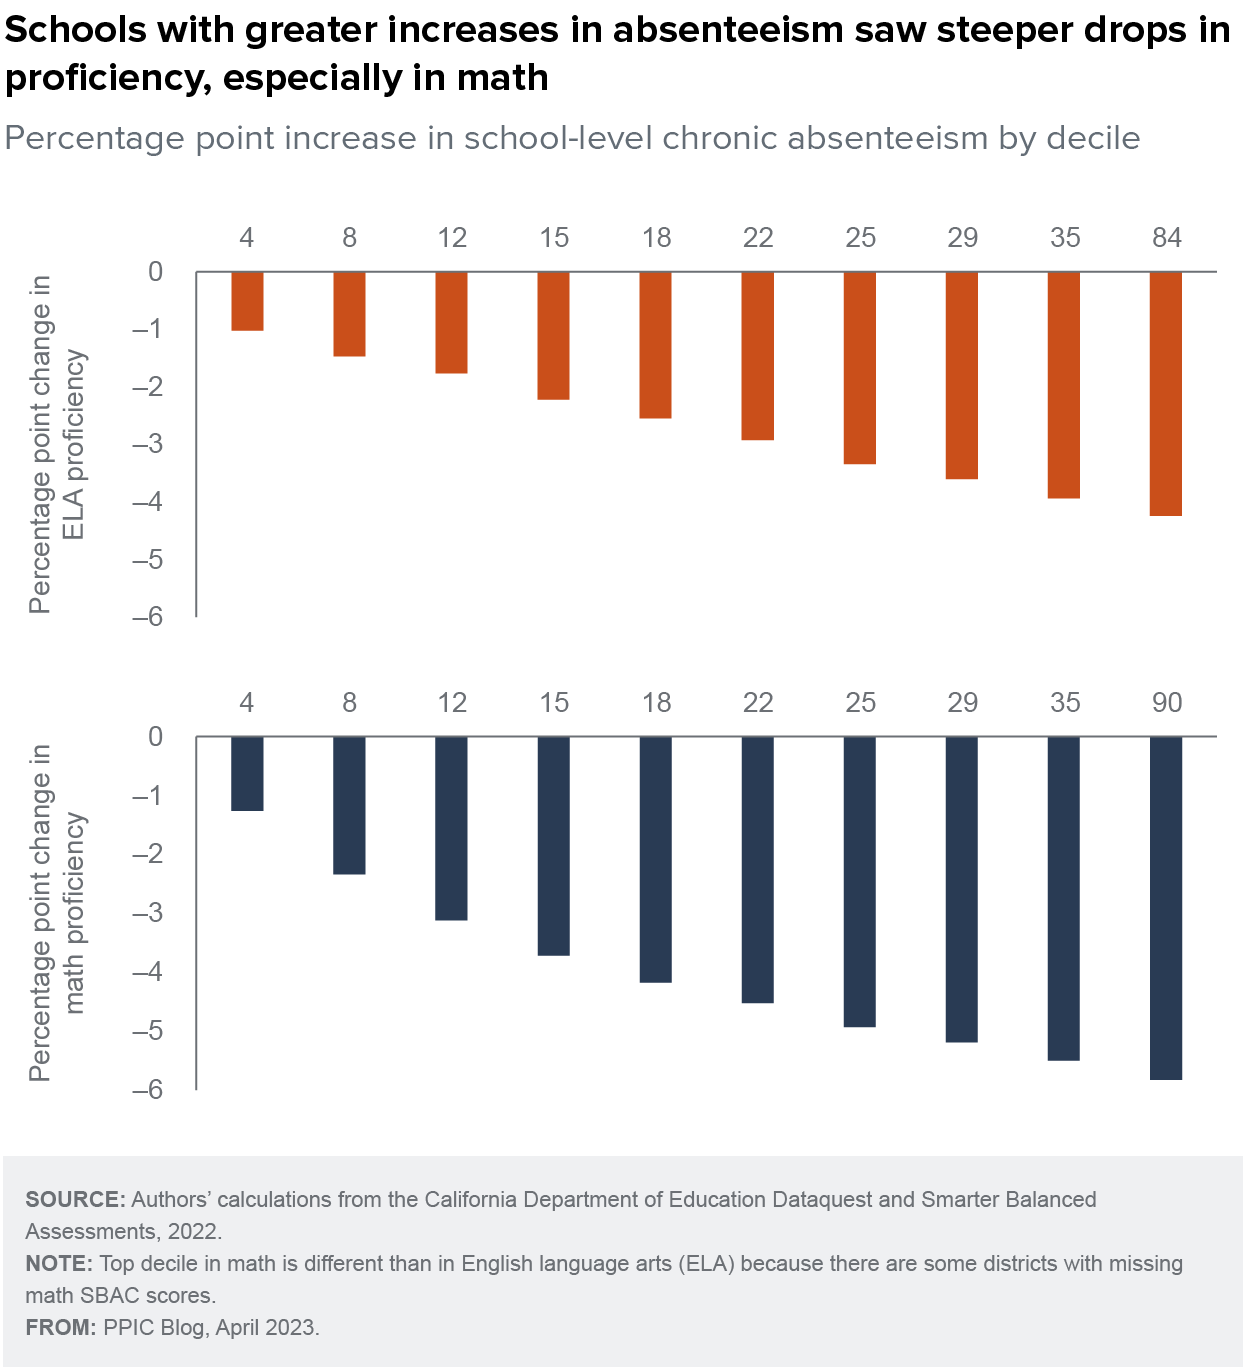 figure - Schools with greater increases in absenteeism saw steeper drops in proficiency, especially in math